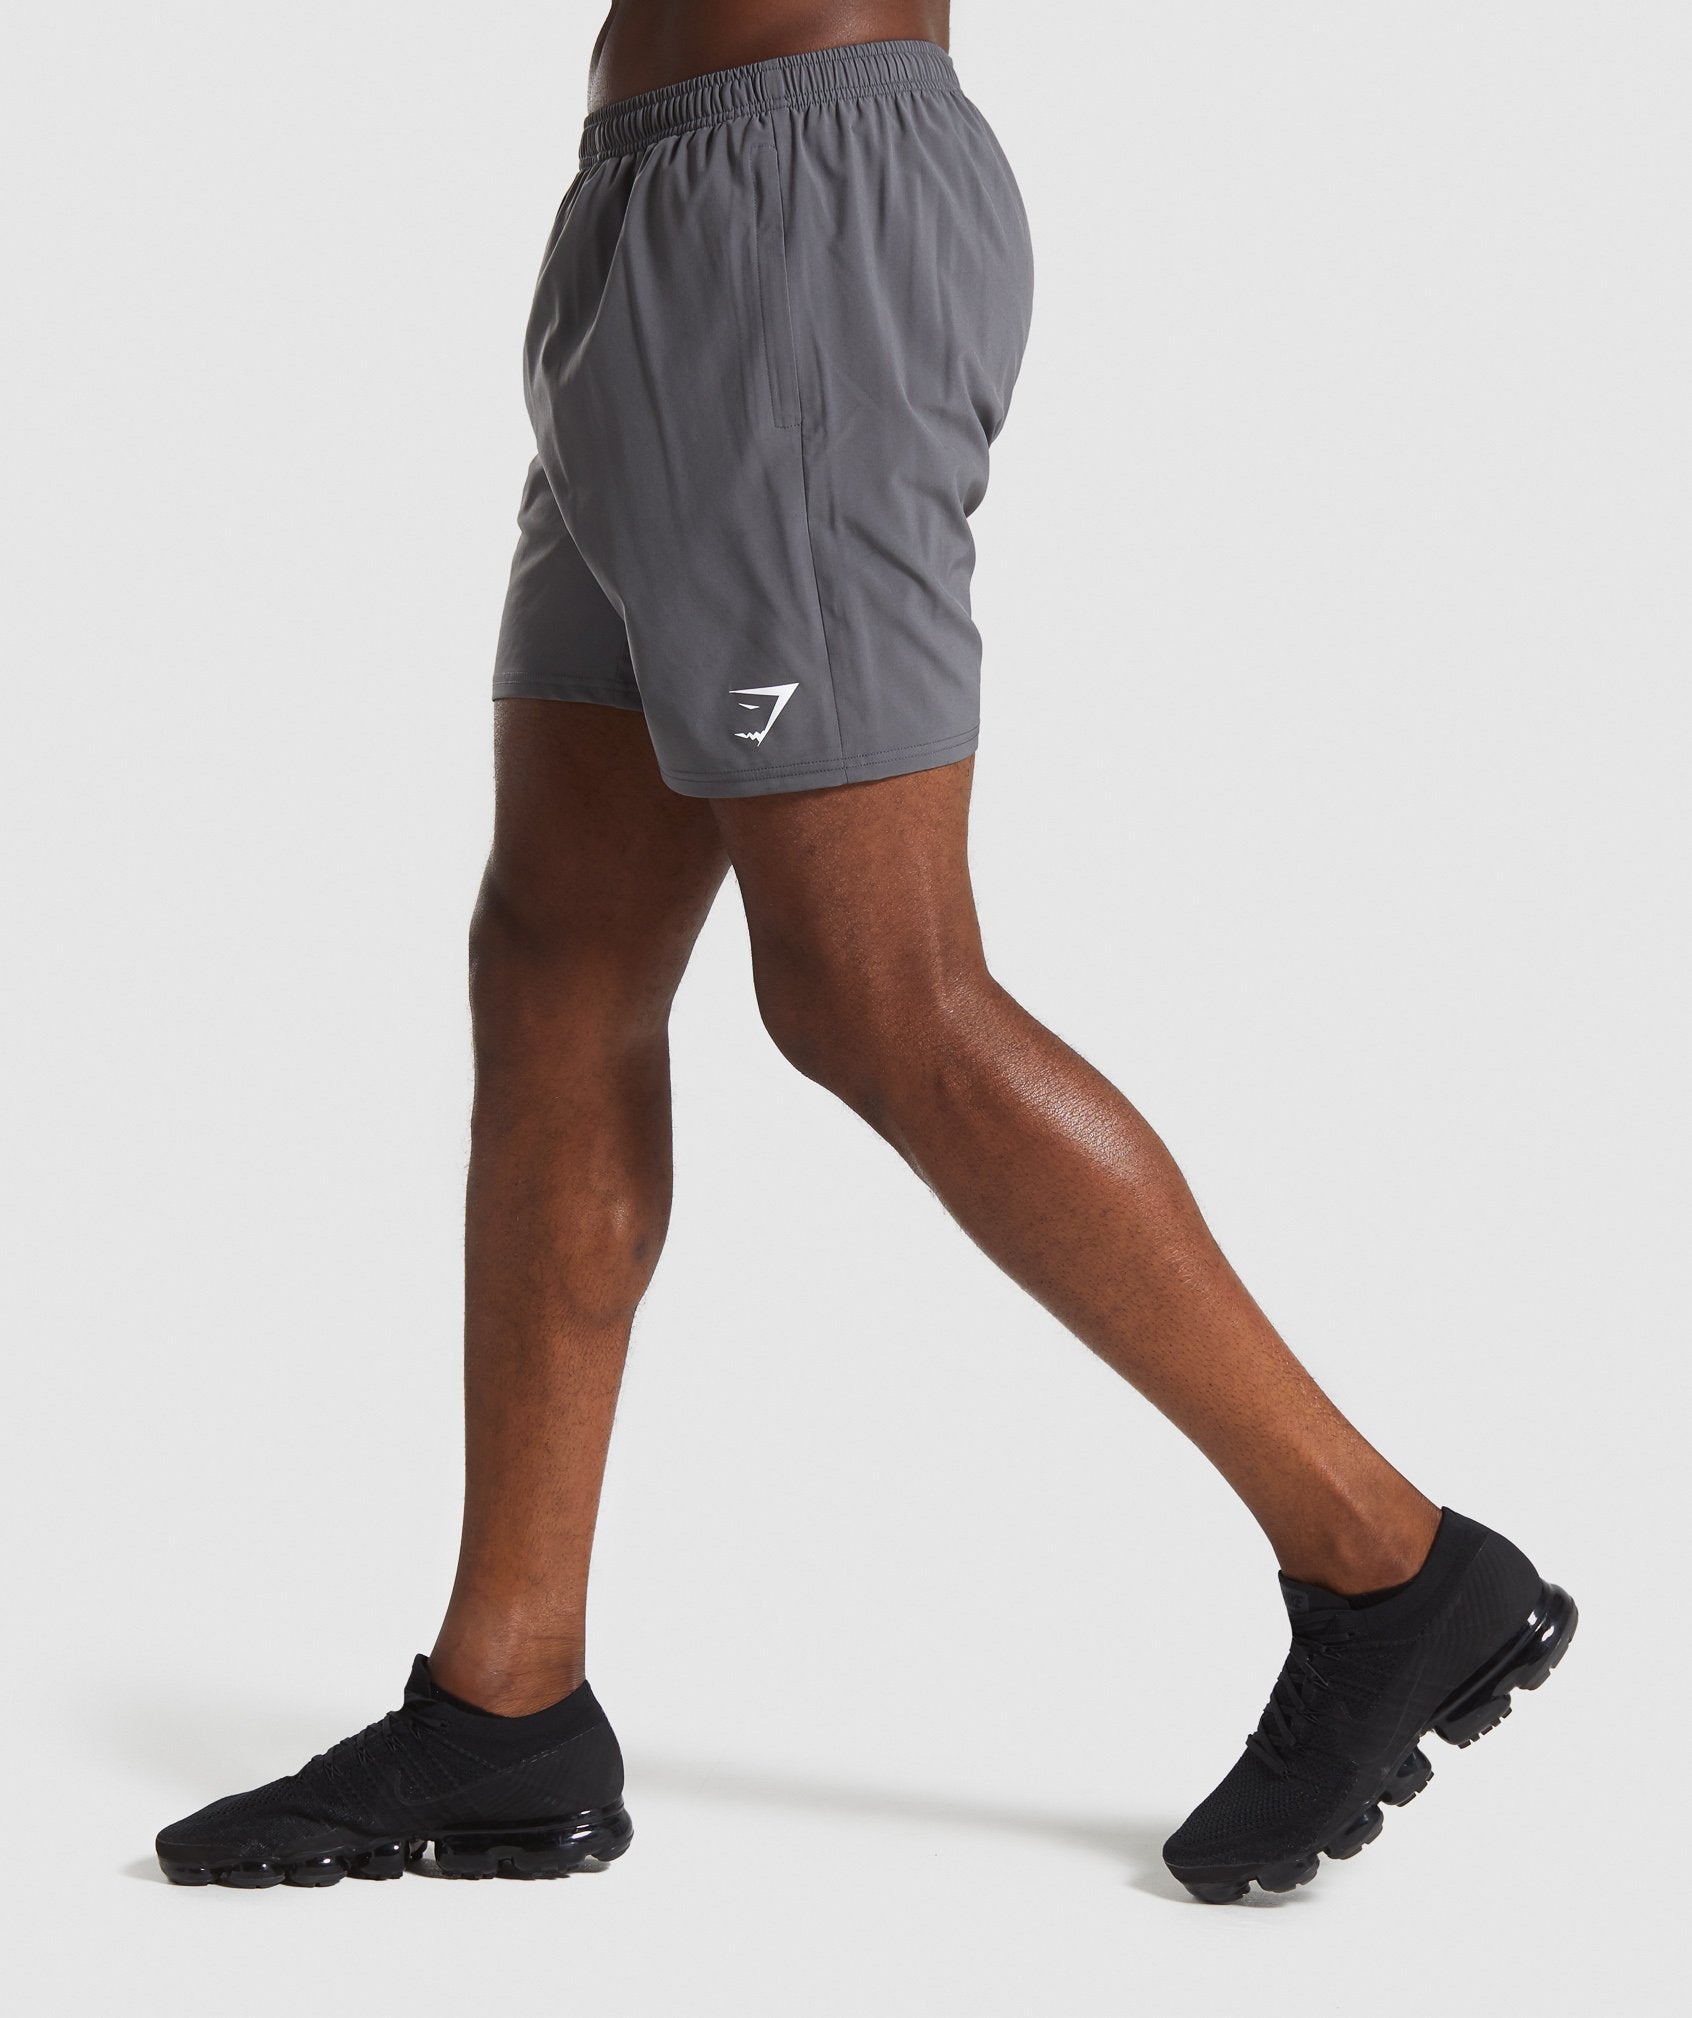 Arrival Zip Pocket Shorts in Charcoal - view 3